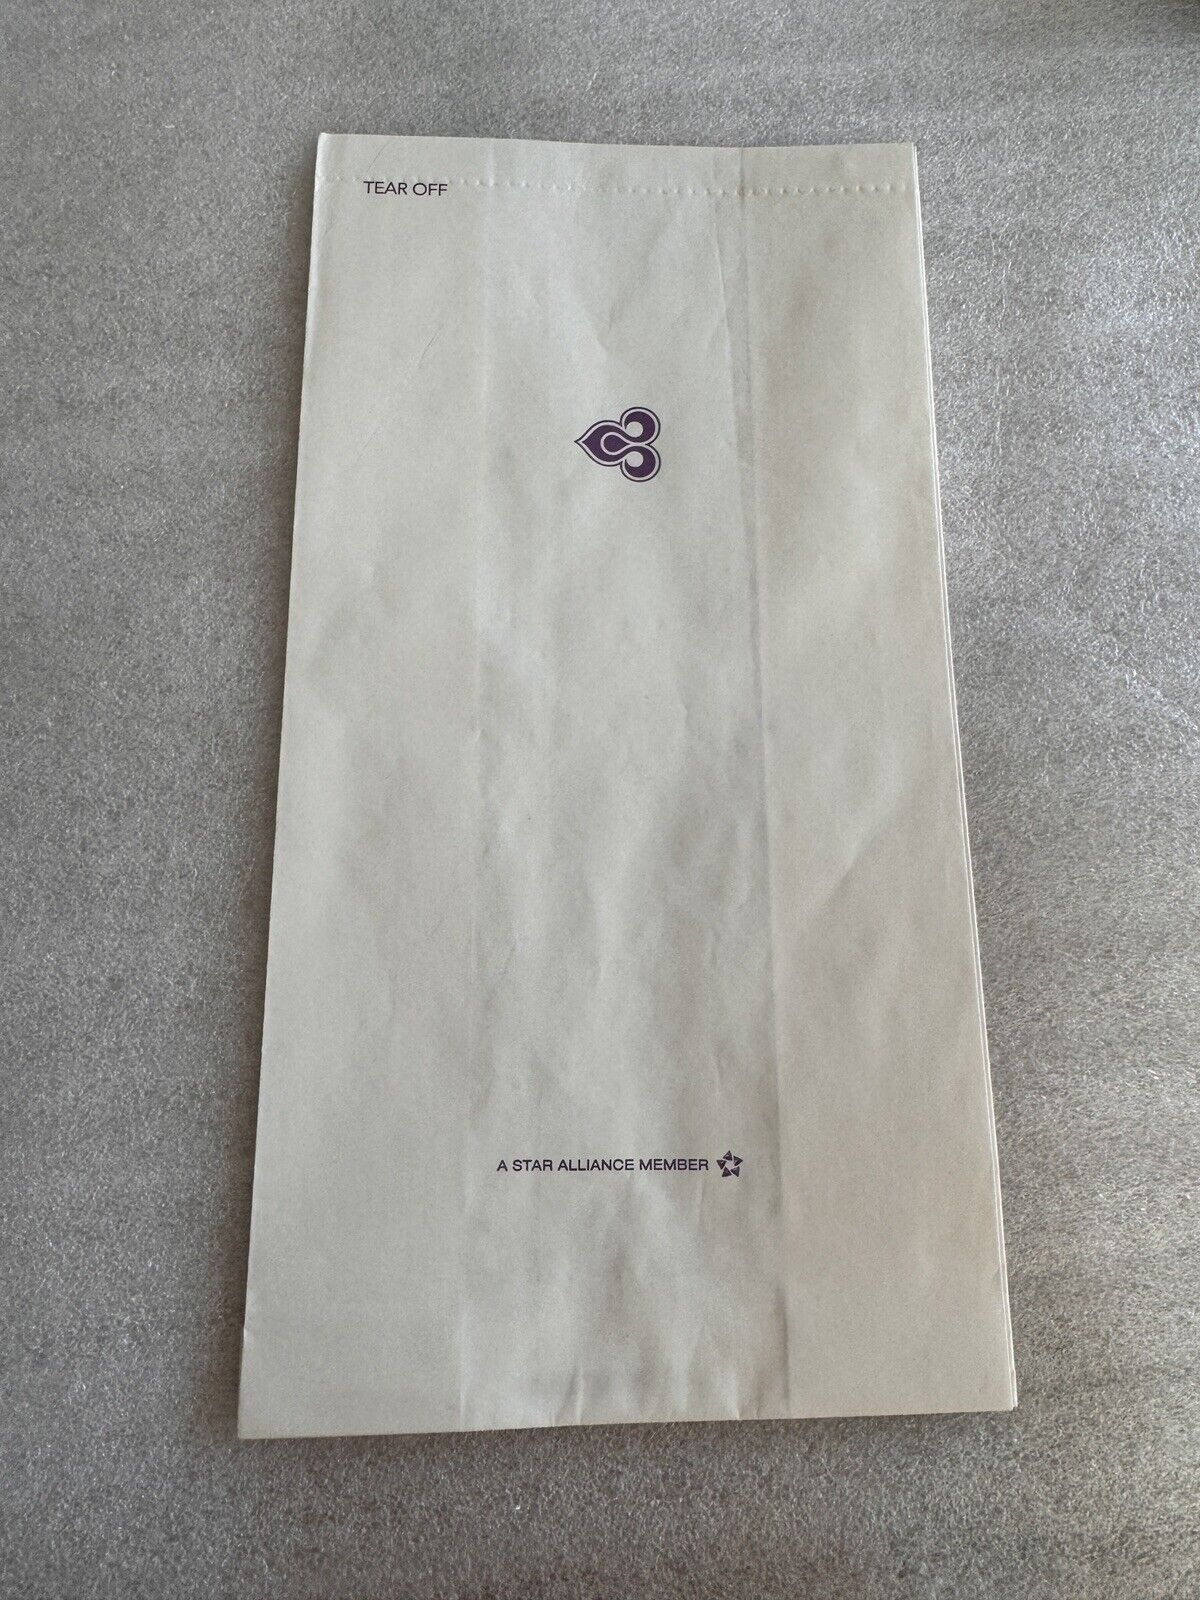 Thai Airways Airlines Barf Bag. Disposal Air Sickness Bags. New. For Collection